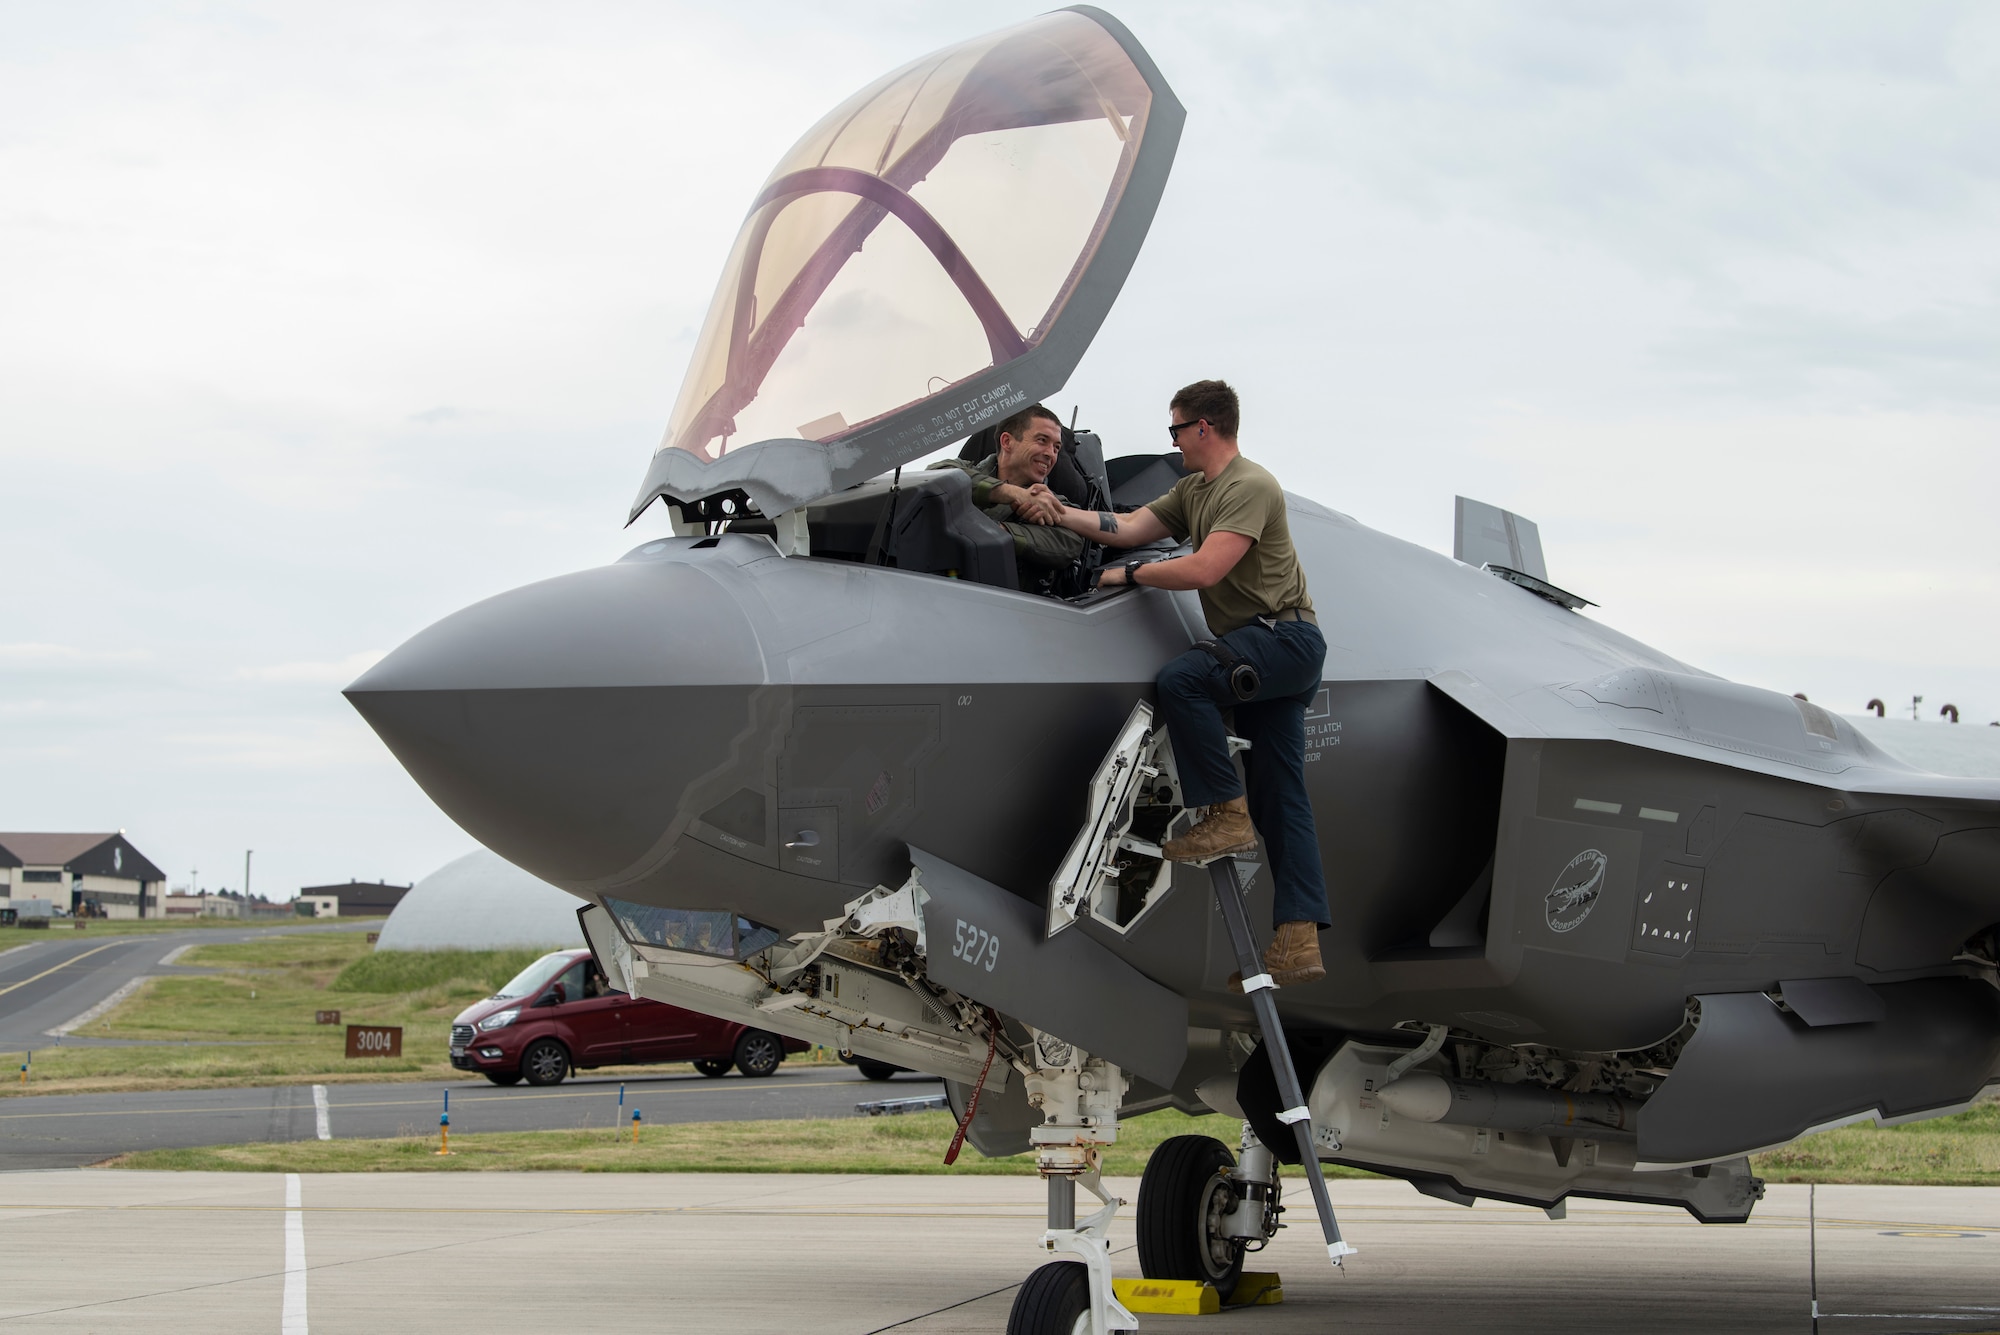 U.S. Air Force Senior Airman Cody Shepard, 315th Fighter Squadron crew chief, congratulates U.S. Air Force Lt. Col. Christopher White, 315th Fighter Squadron commander, after the pilot reached his 1,000th flight hour milestone in the F-35A Lightning II at Spangdahlem Air Base, Germany, June 3, 2022.  Airmen from the Vermont Air National Guard's 158th Fighter Wing are deployed to Europe to increase readiness and enhance NATO's collective defense. (U.S. Air Force photo by Tech. Sgt. Anthony Plyler)